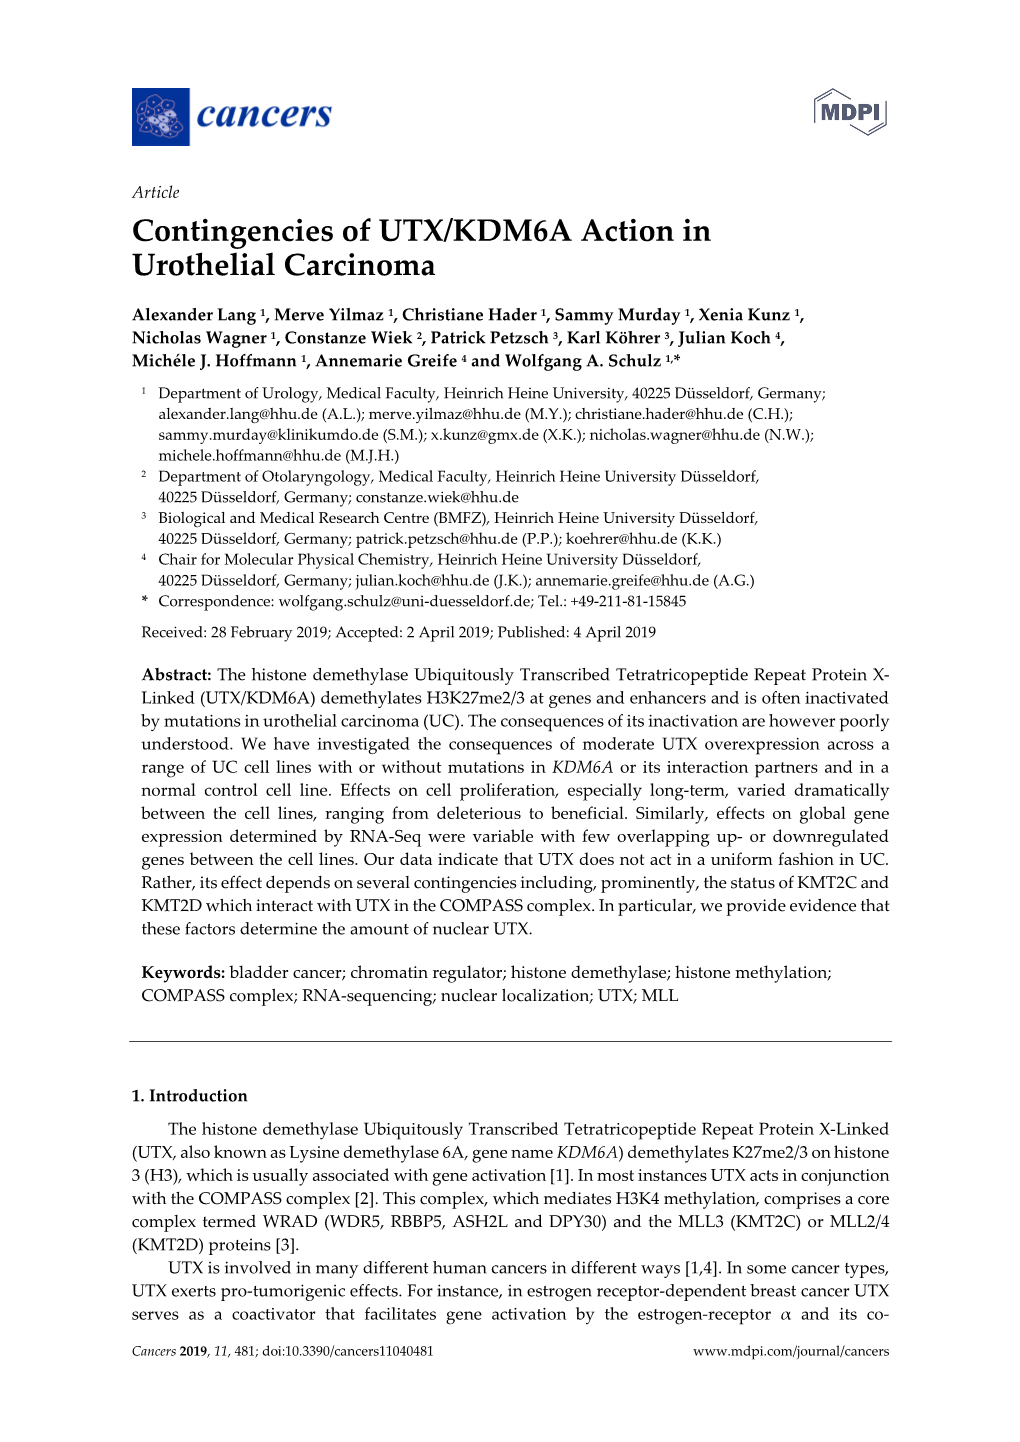 Article Contingencies of UTX/KDM6A Action in Urothelial Carcinoma